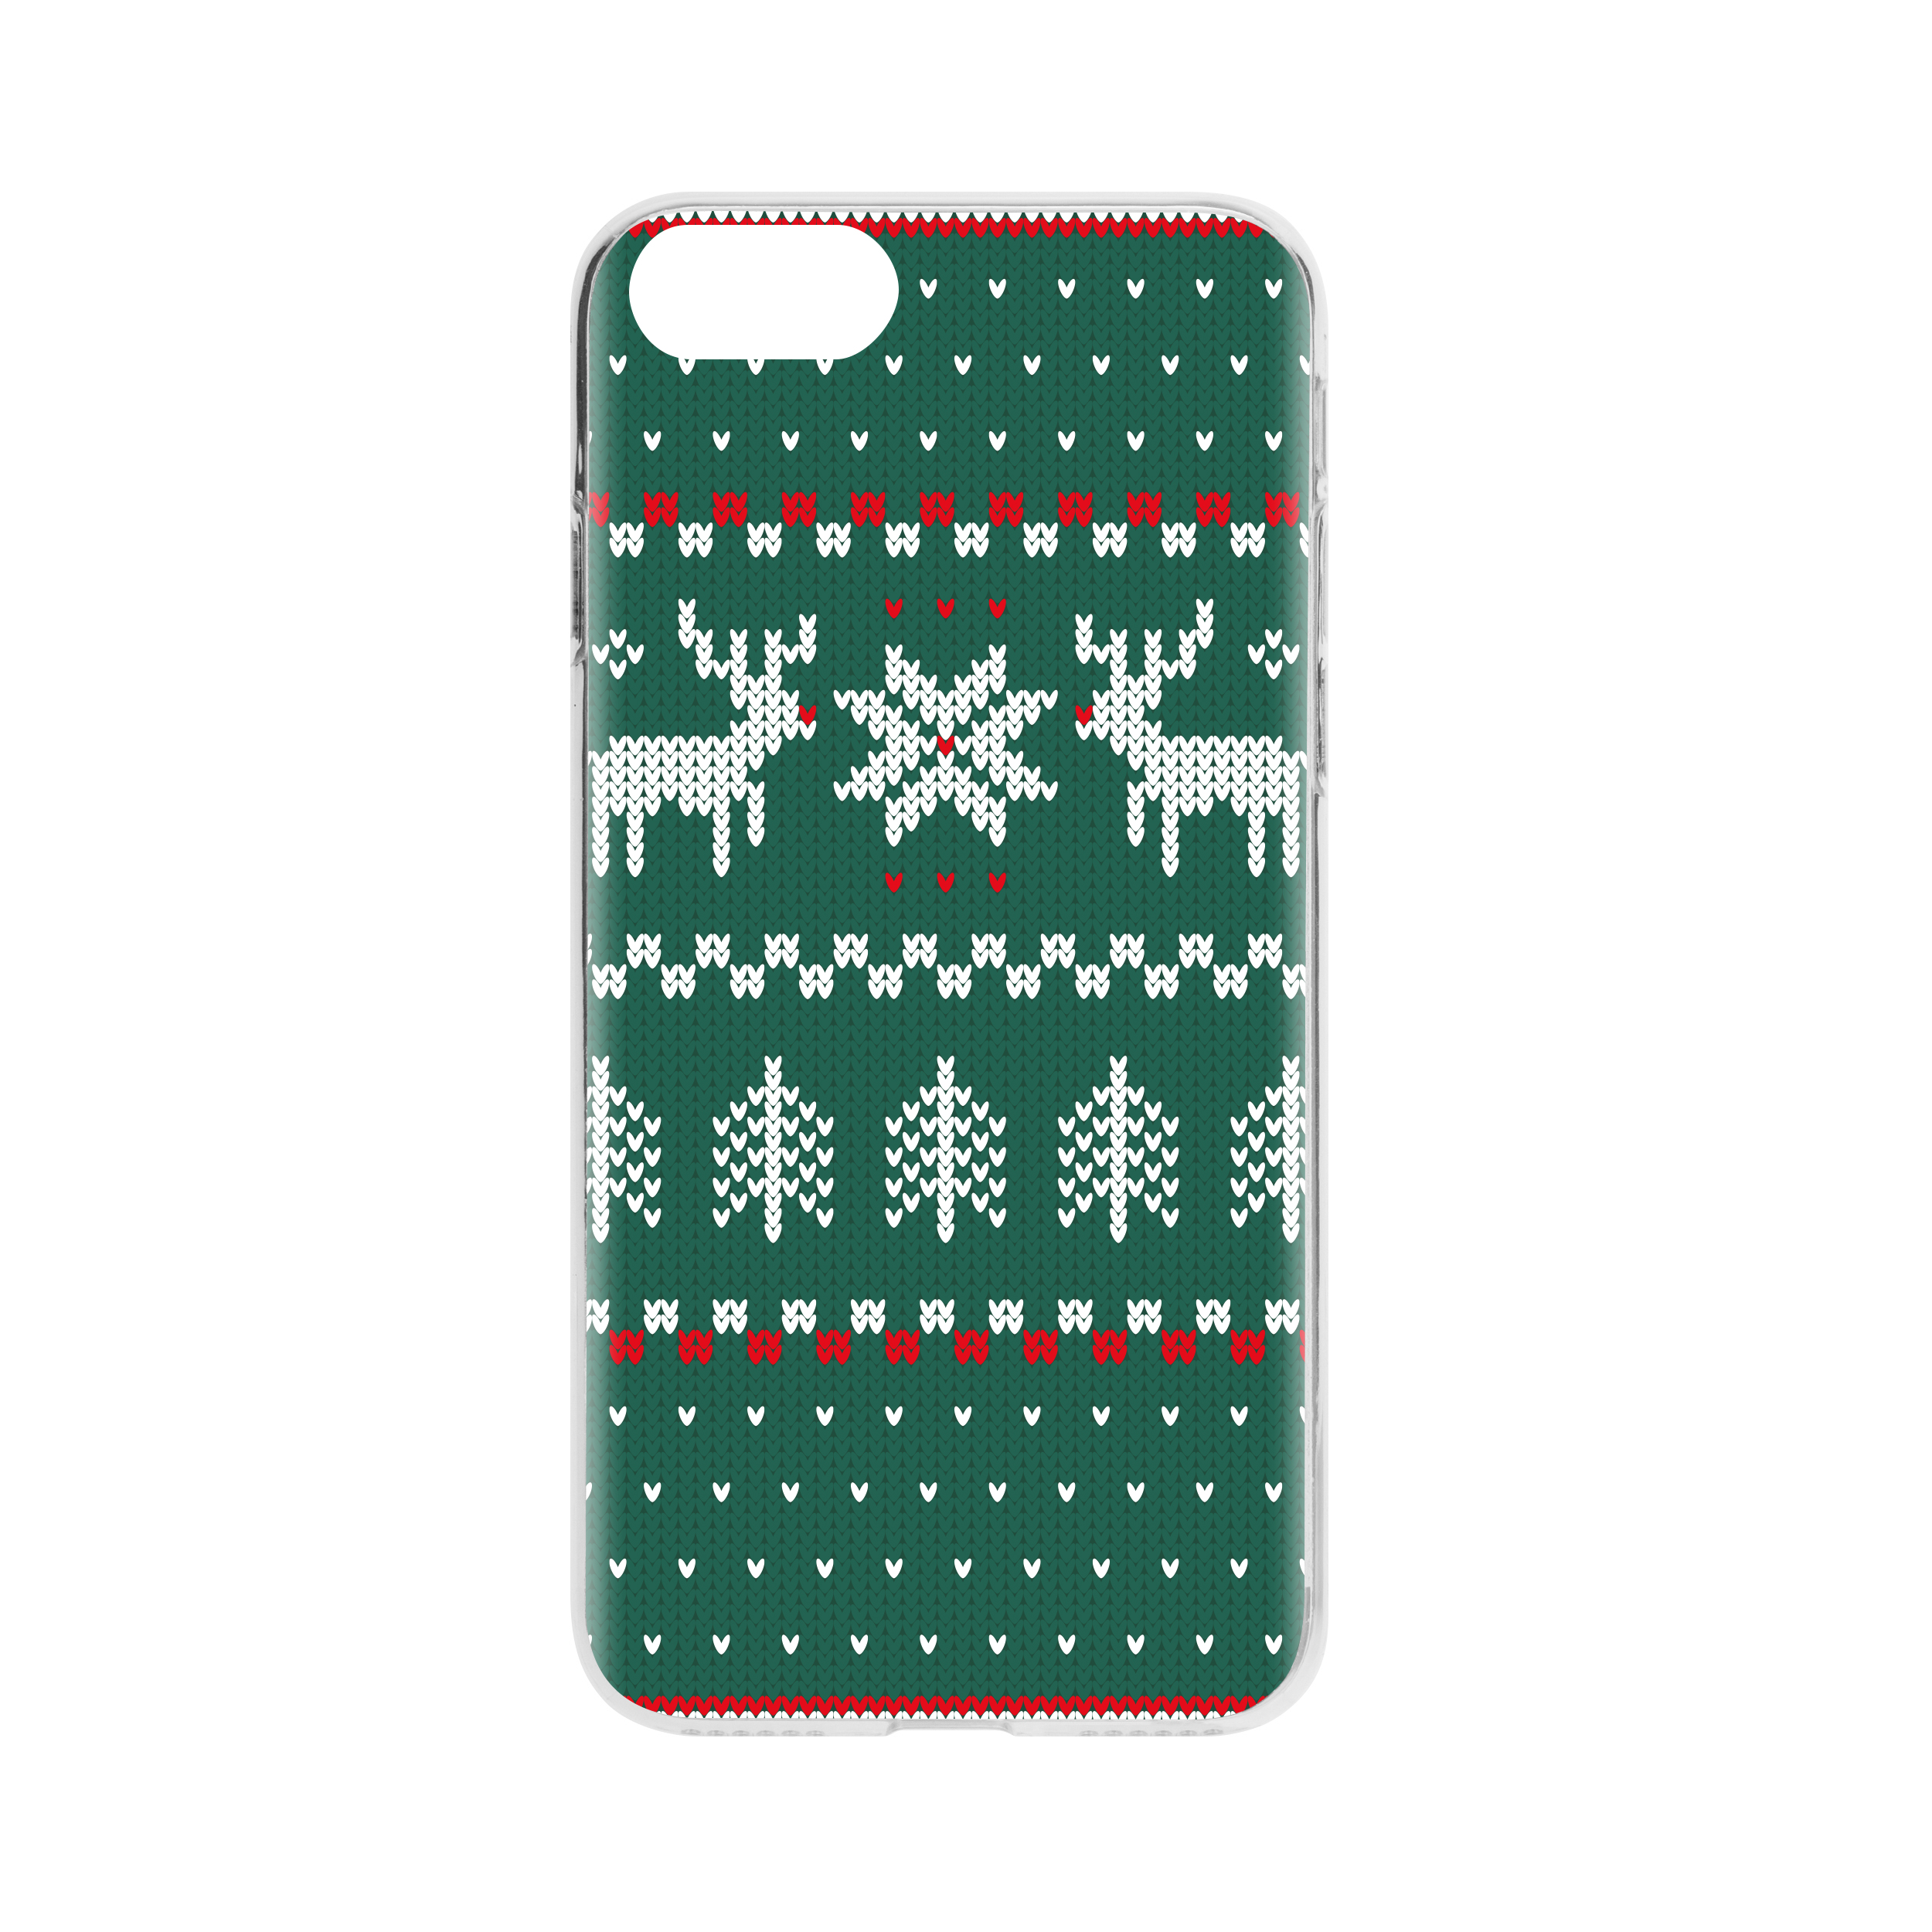 FLAVR Case Ugly Xmas Sweater, 7/8/SE GREEN 2, APPLE, IPHONE Backcover